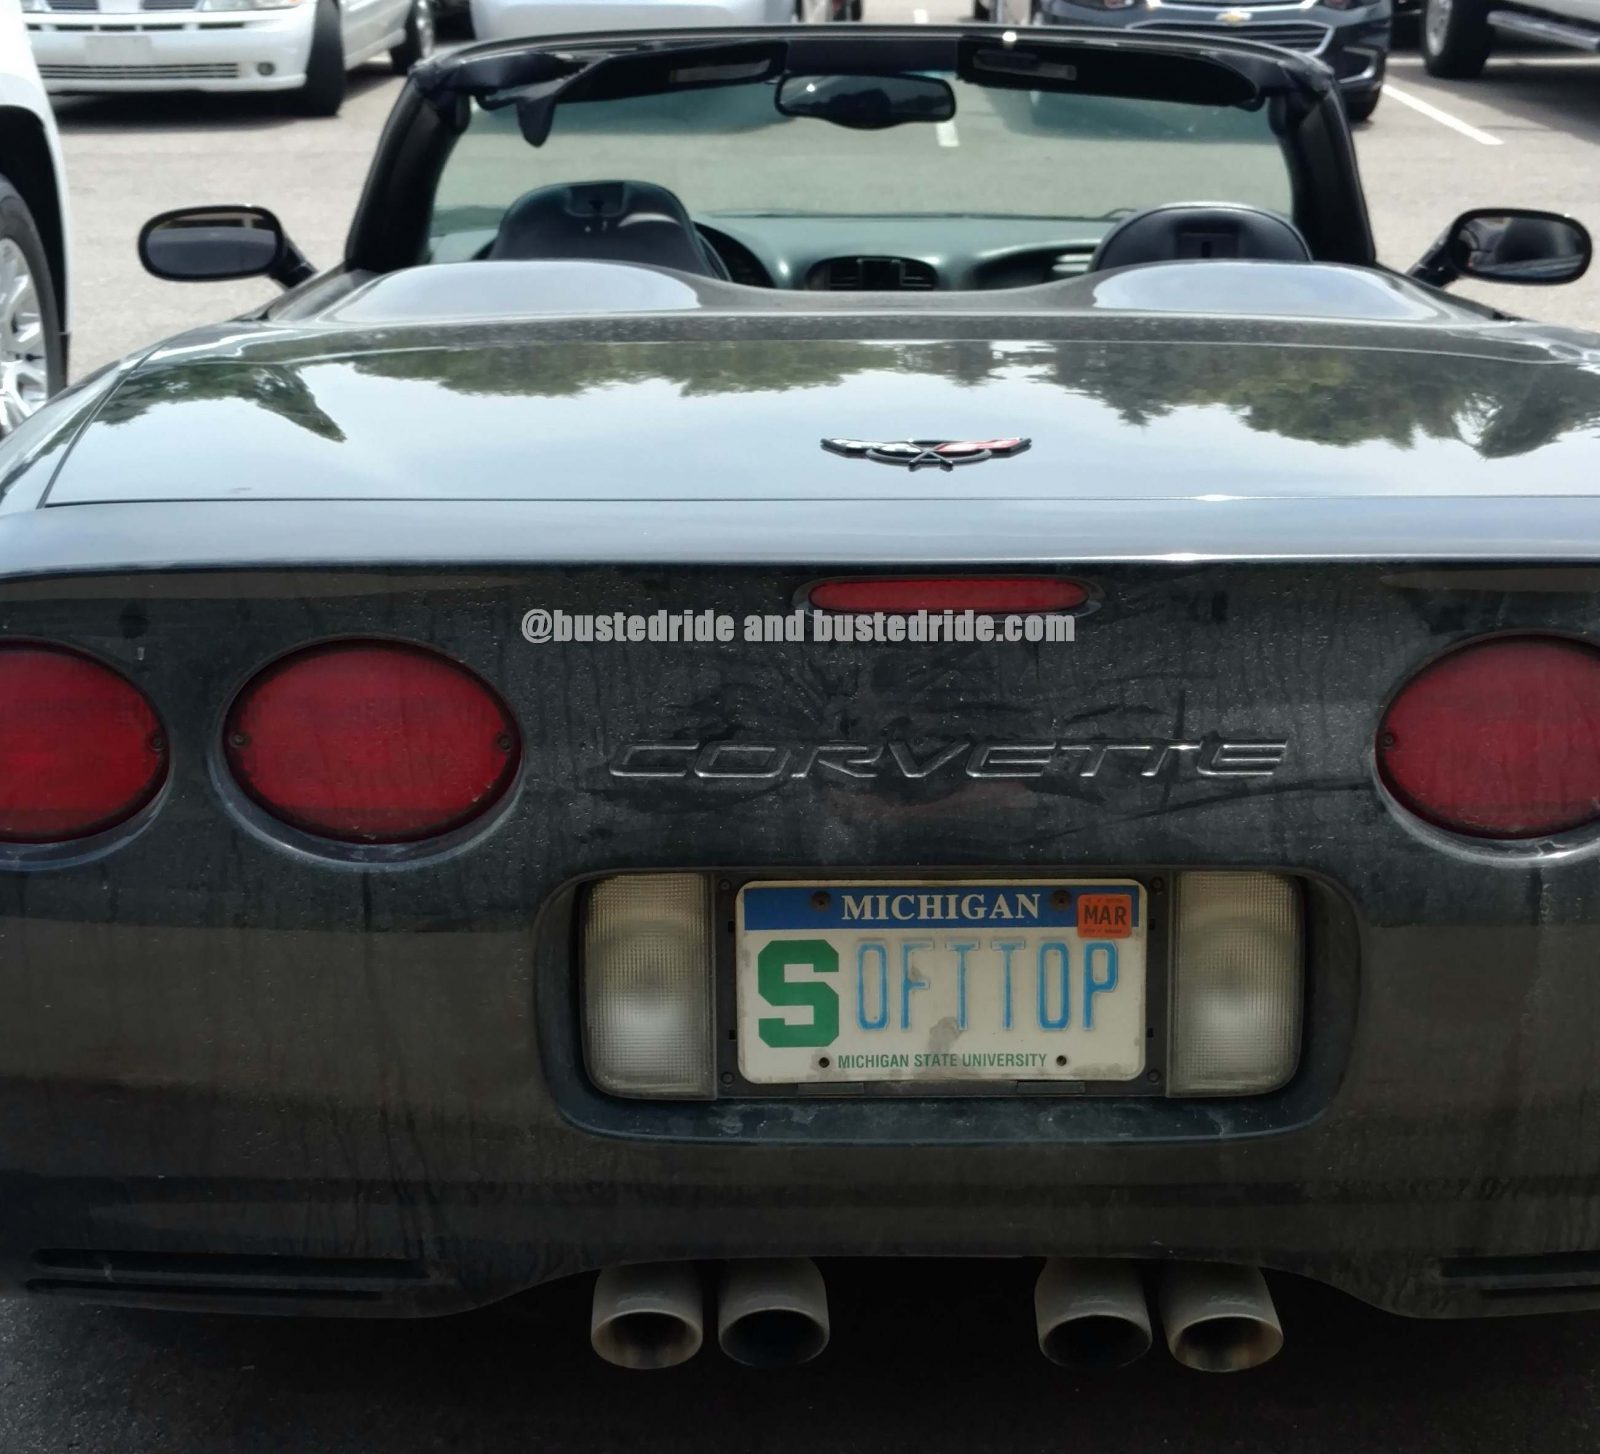 (S)OFTTOP - Vanity License Plate by Busted Ride